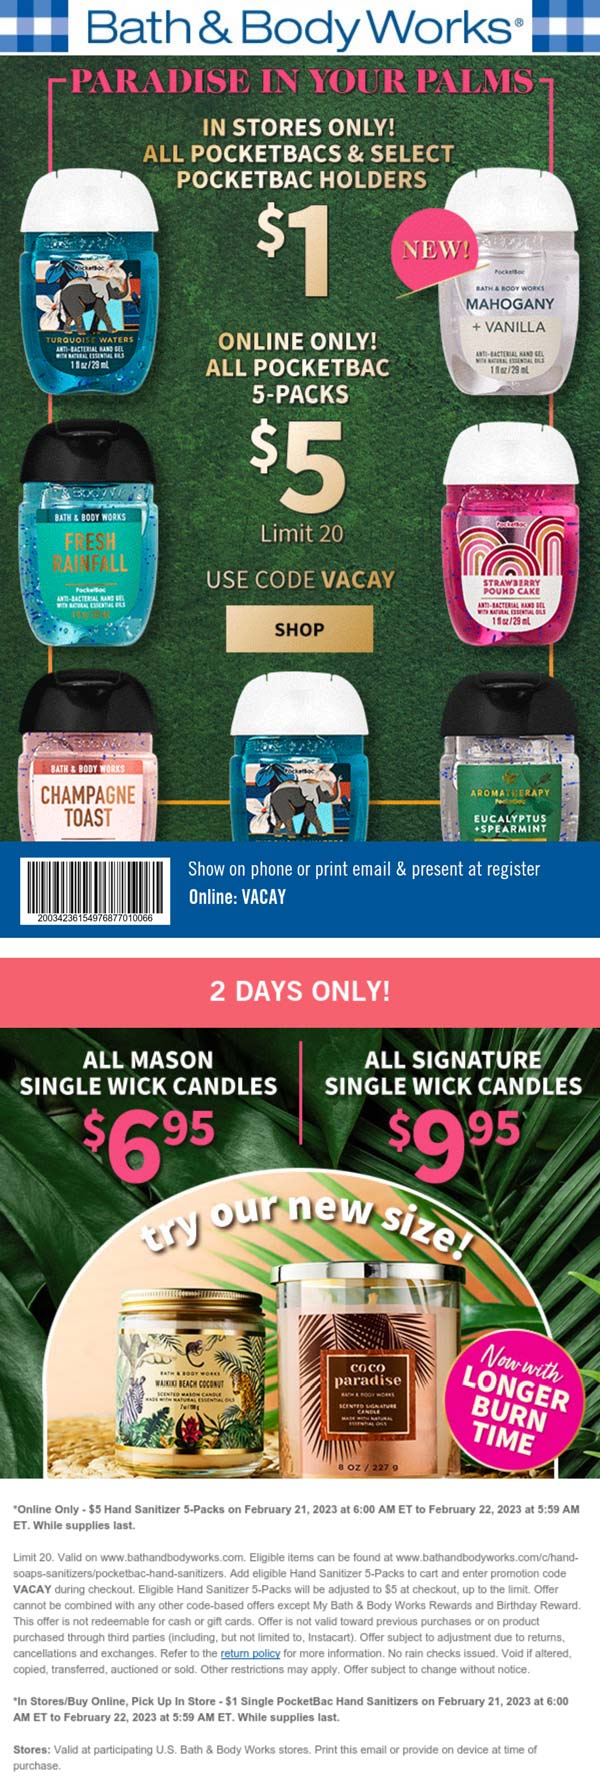 Bath & Body Works stores Coupon  5-pack hand sanitizer for $5 at Bath & Body Works, or online via promo code VACAY #bathbodyworks 